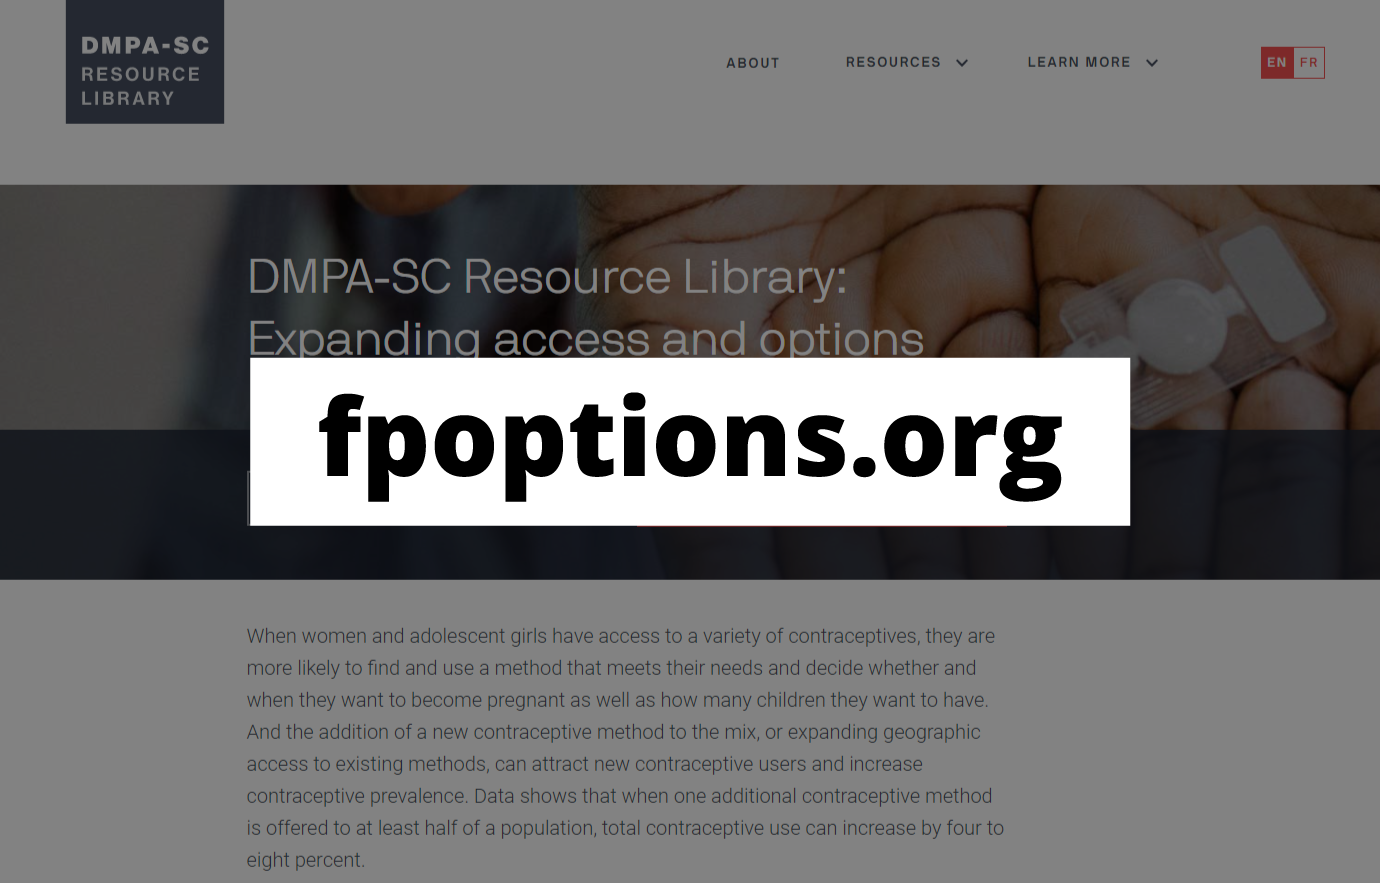 DMPA-SC Resource Library: Expanding access and options (fpoptions.org)